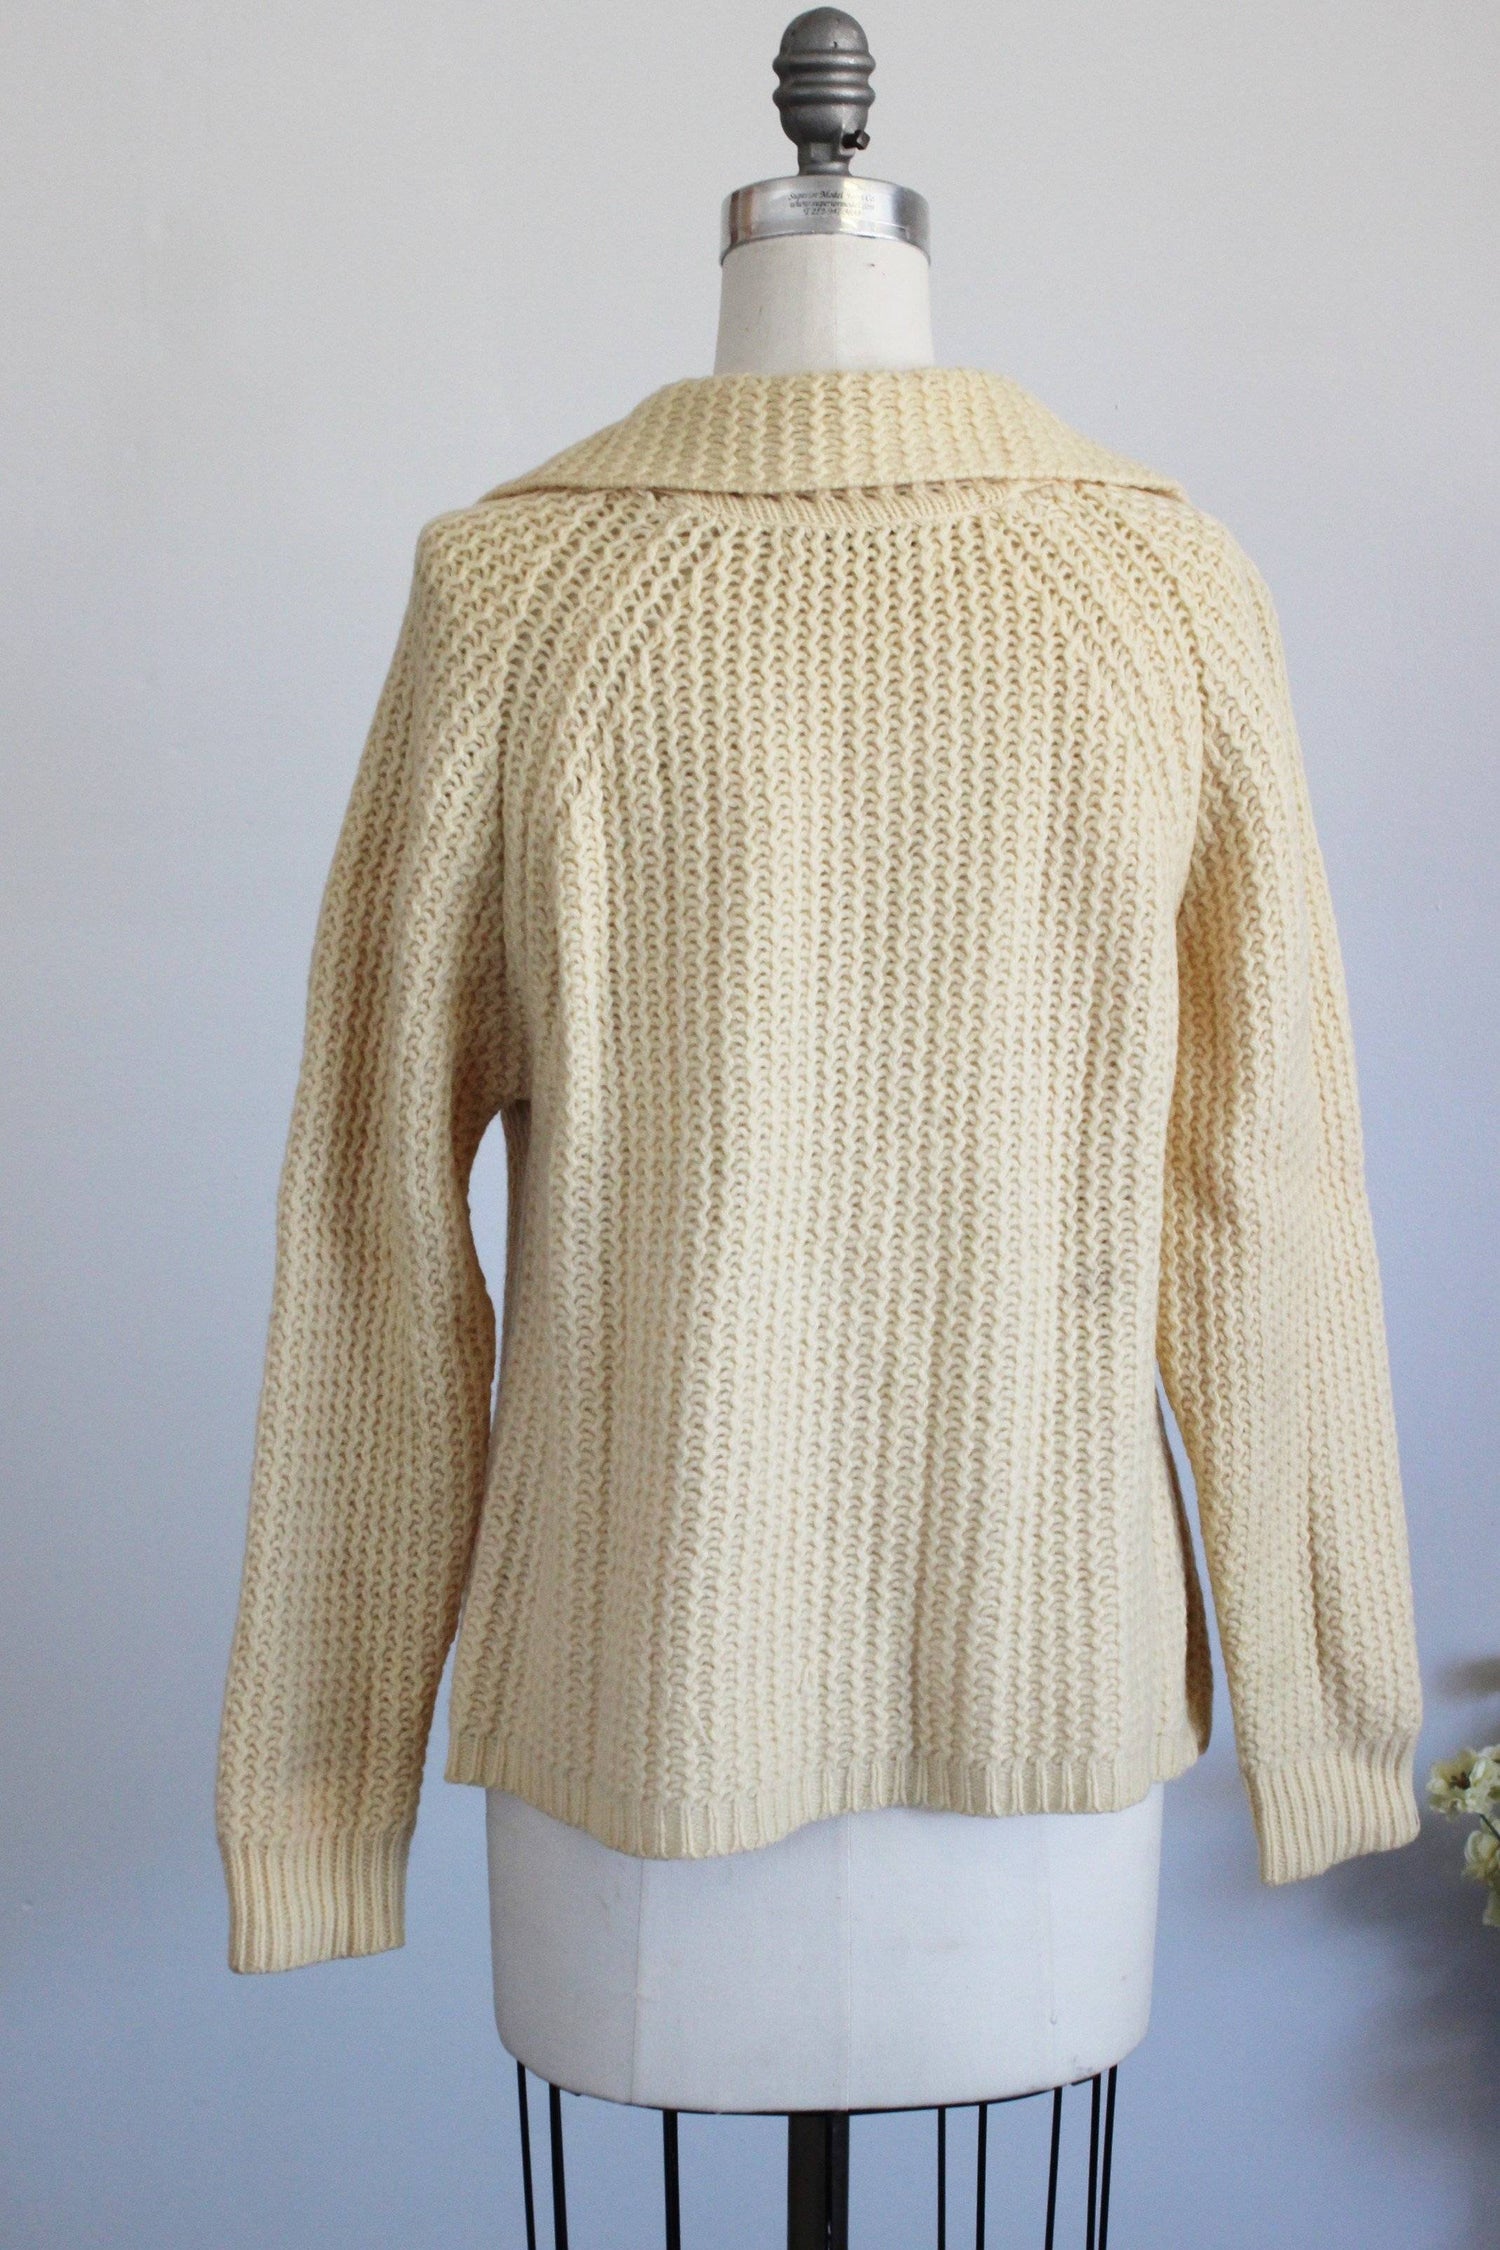 Vintage 1960s Yellow Cardigan Sweater with Pockets by Lerner Shops